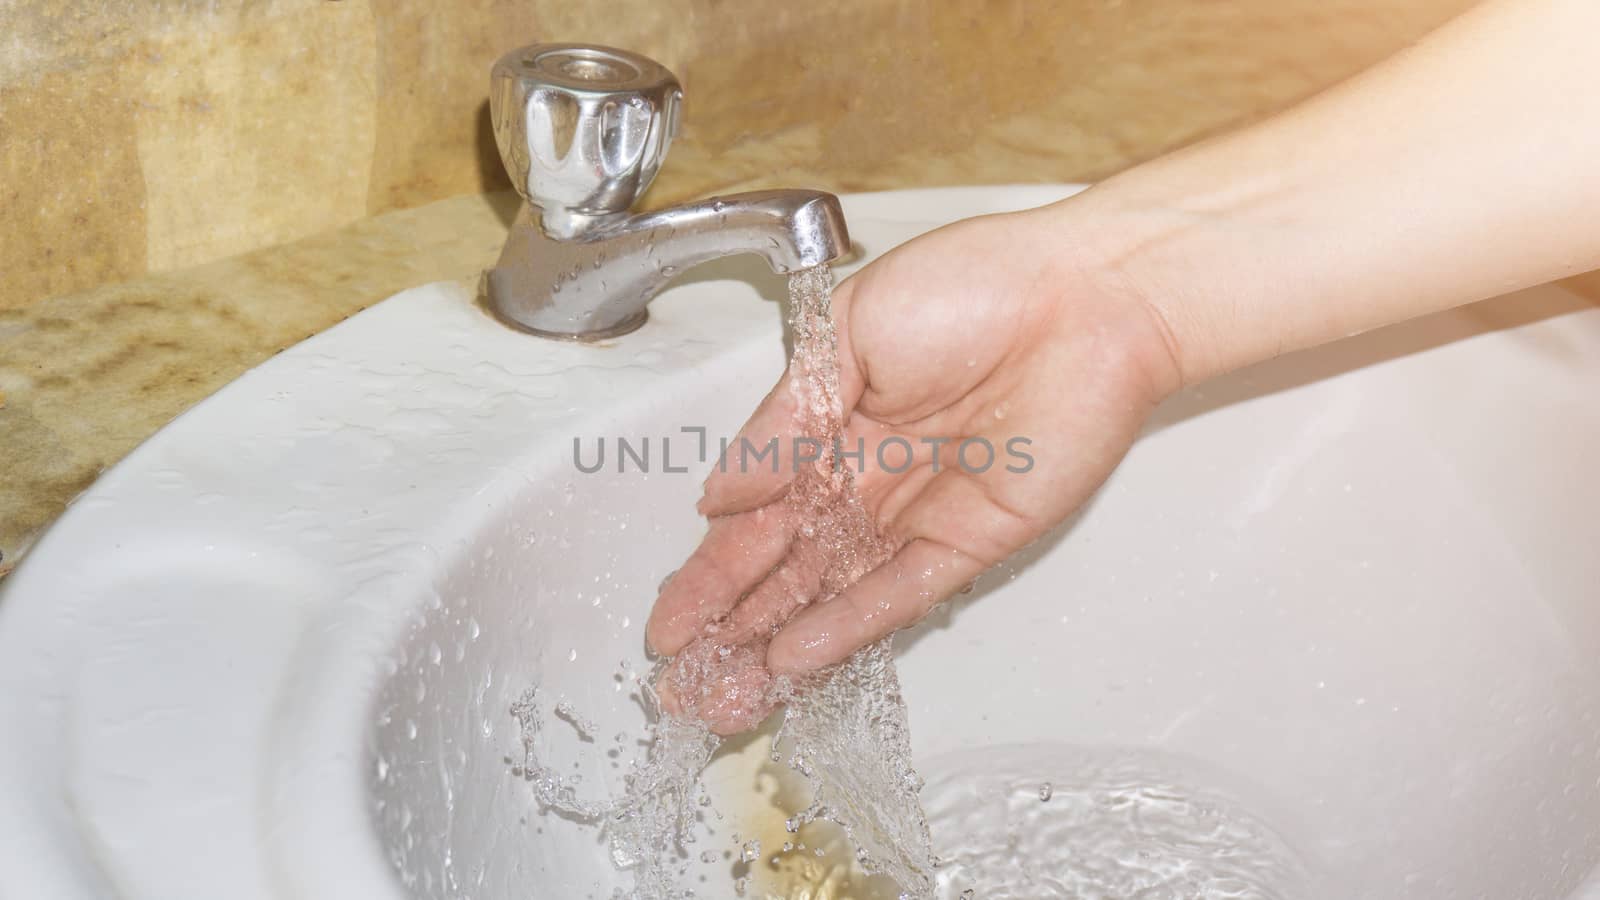 Boy washes hands with running water.